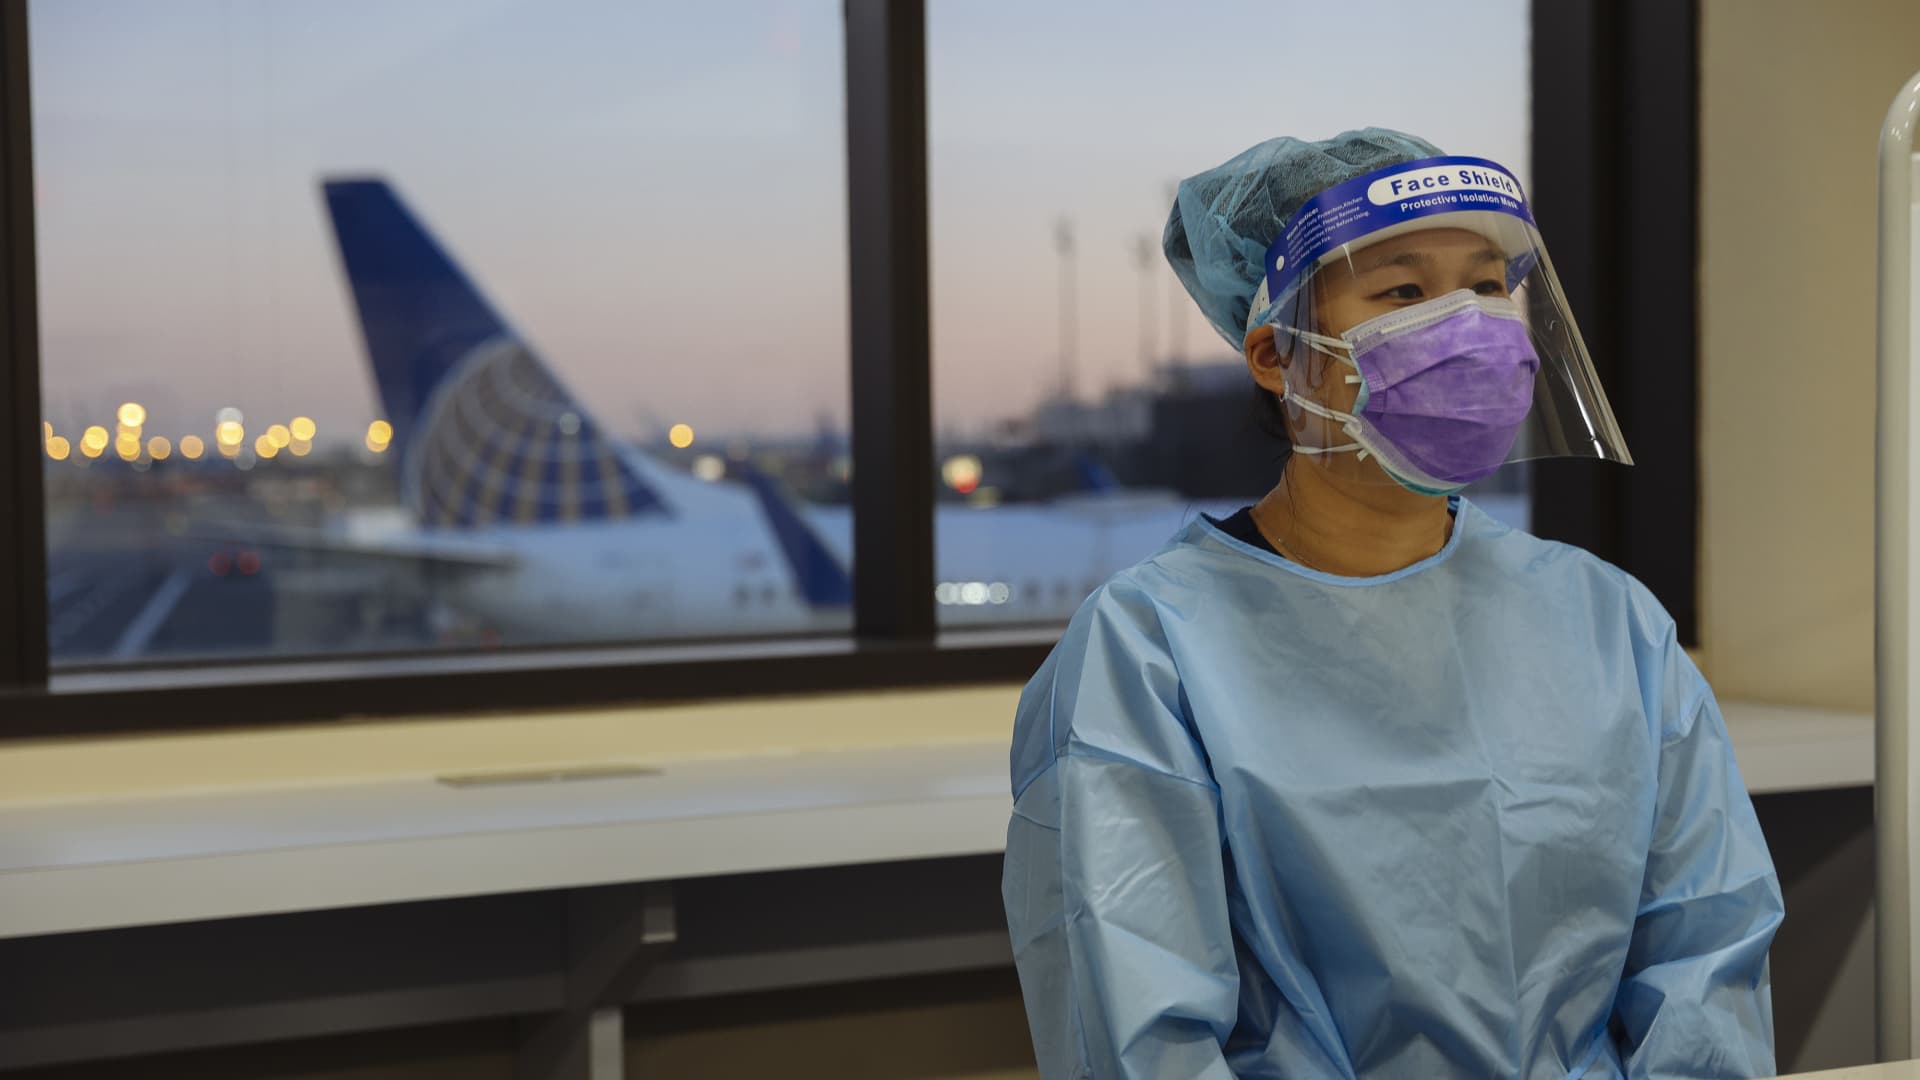 A healthcare worker wears personal protective equipment (PPE) during a United Airlines Covid-19 test pilot program at Newark Liberty International Airport in Newark, New Jersey, U.S., on Monday, Nov. 16, 2020.